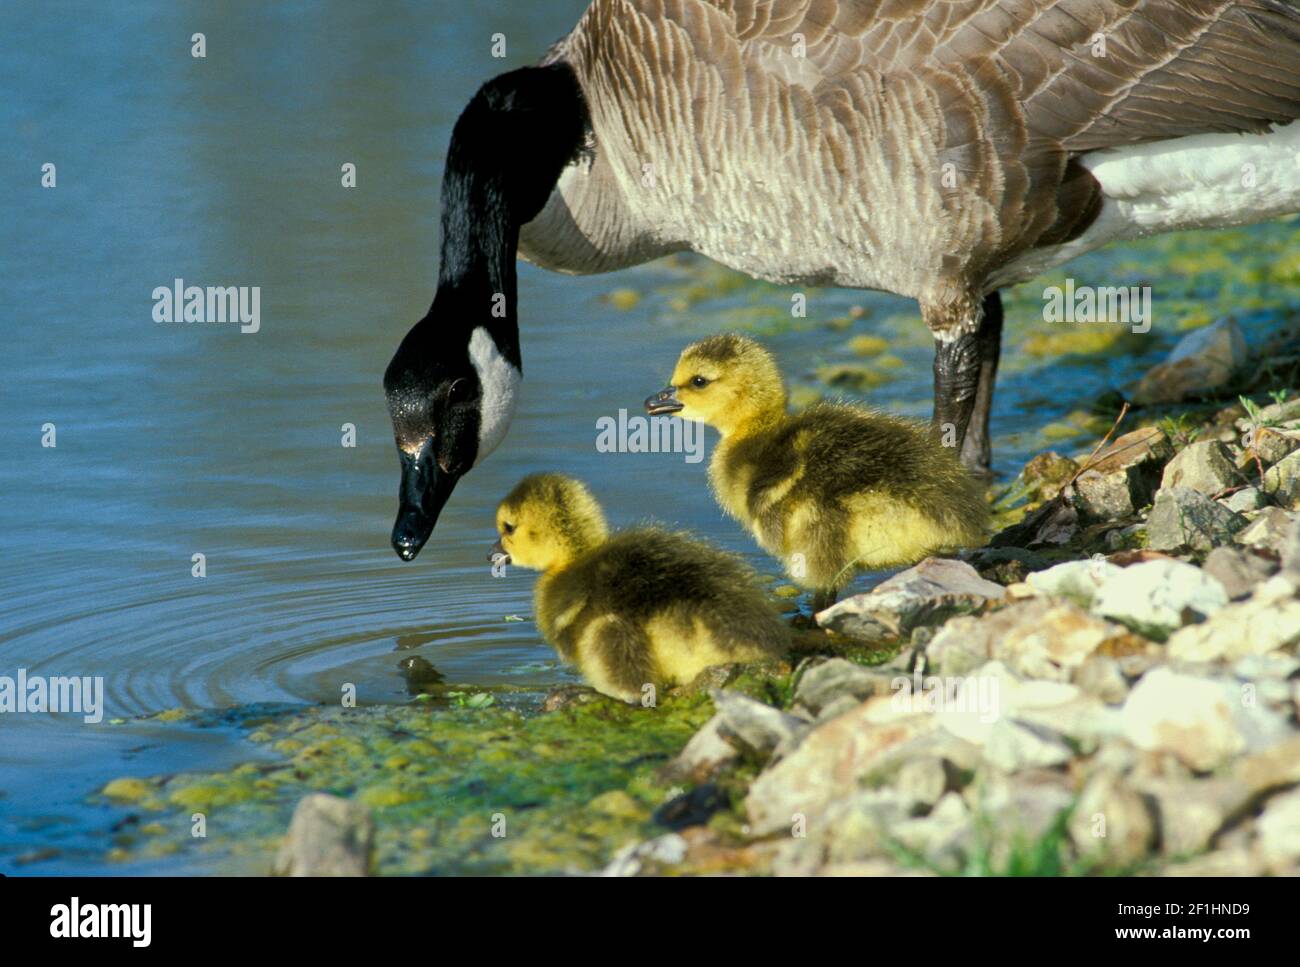 Mother Canada goose, Branta canadensis, teaches her adorable goslings fishing at the water's edge, Missouri, USA Stock Photo